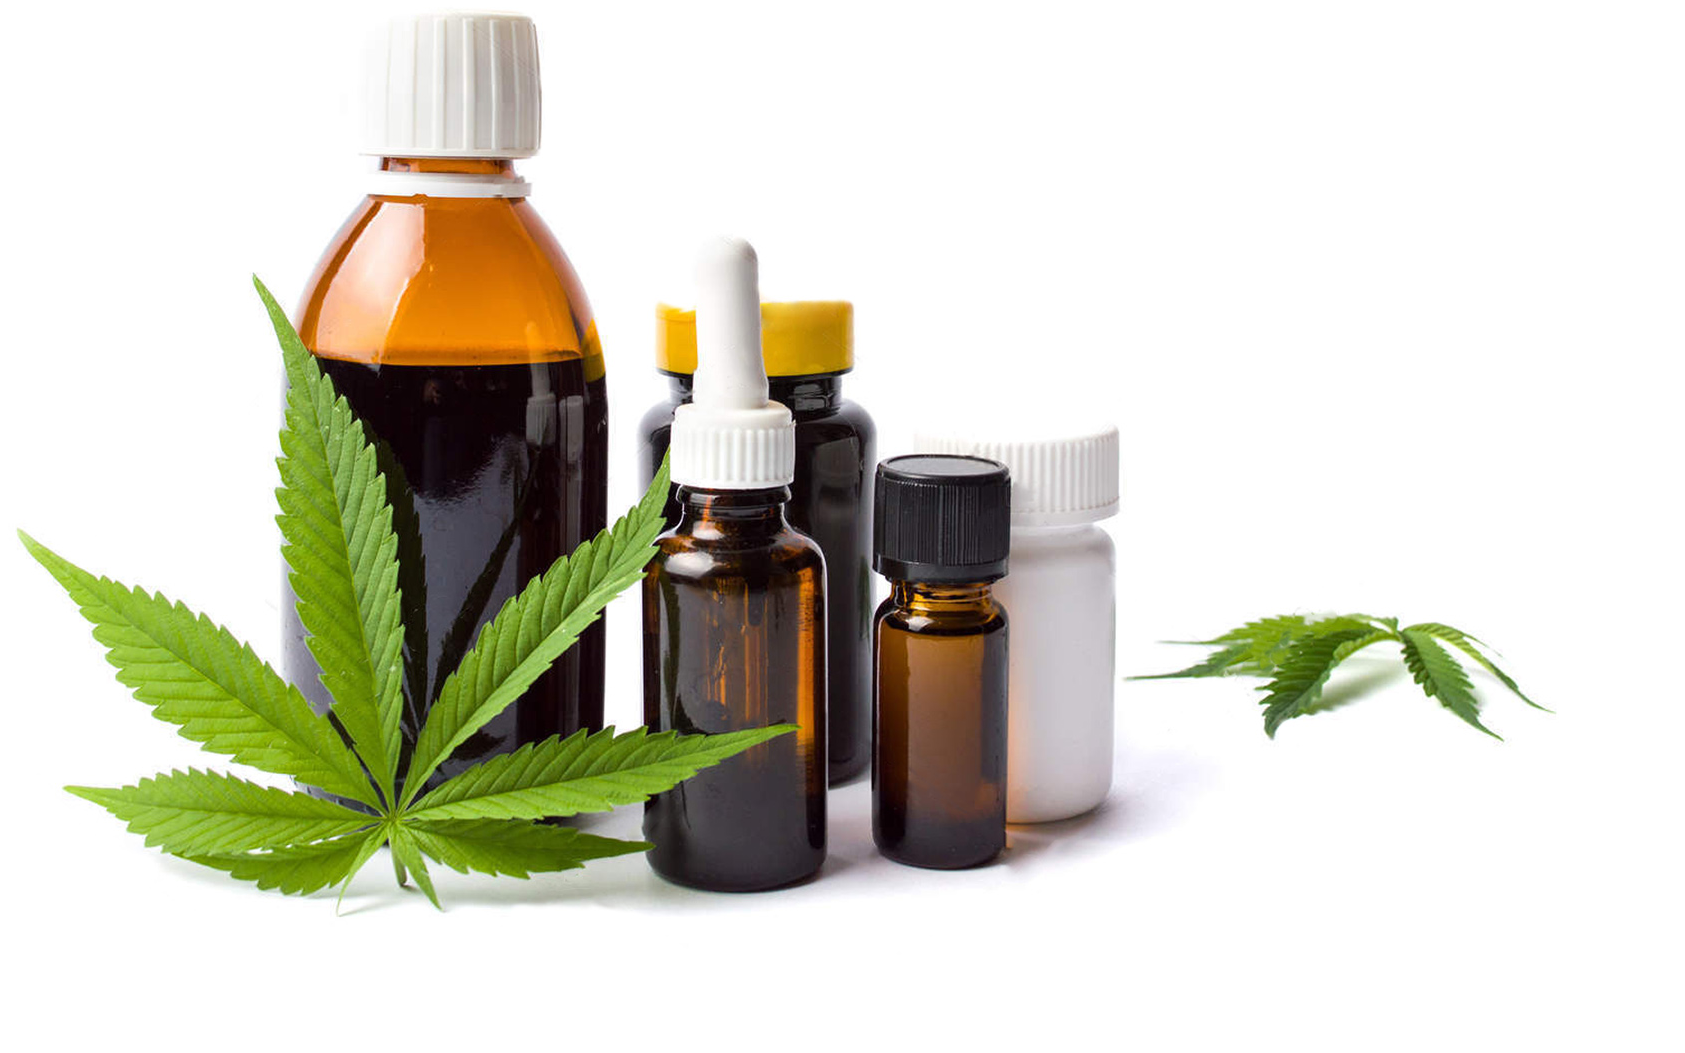 What You Need to Know Before Buying CBD Products